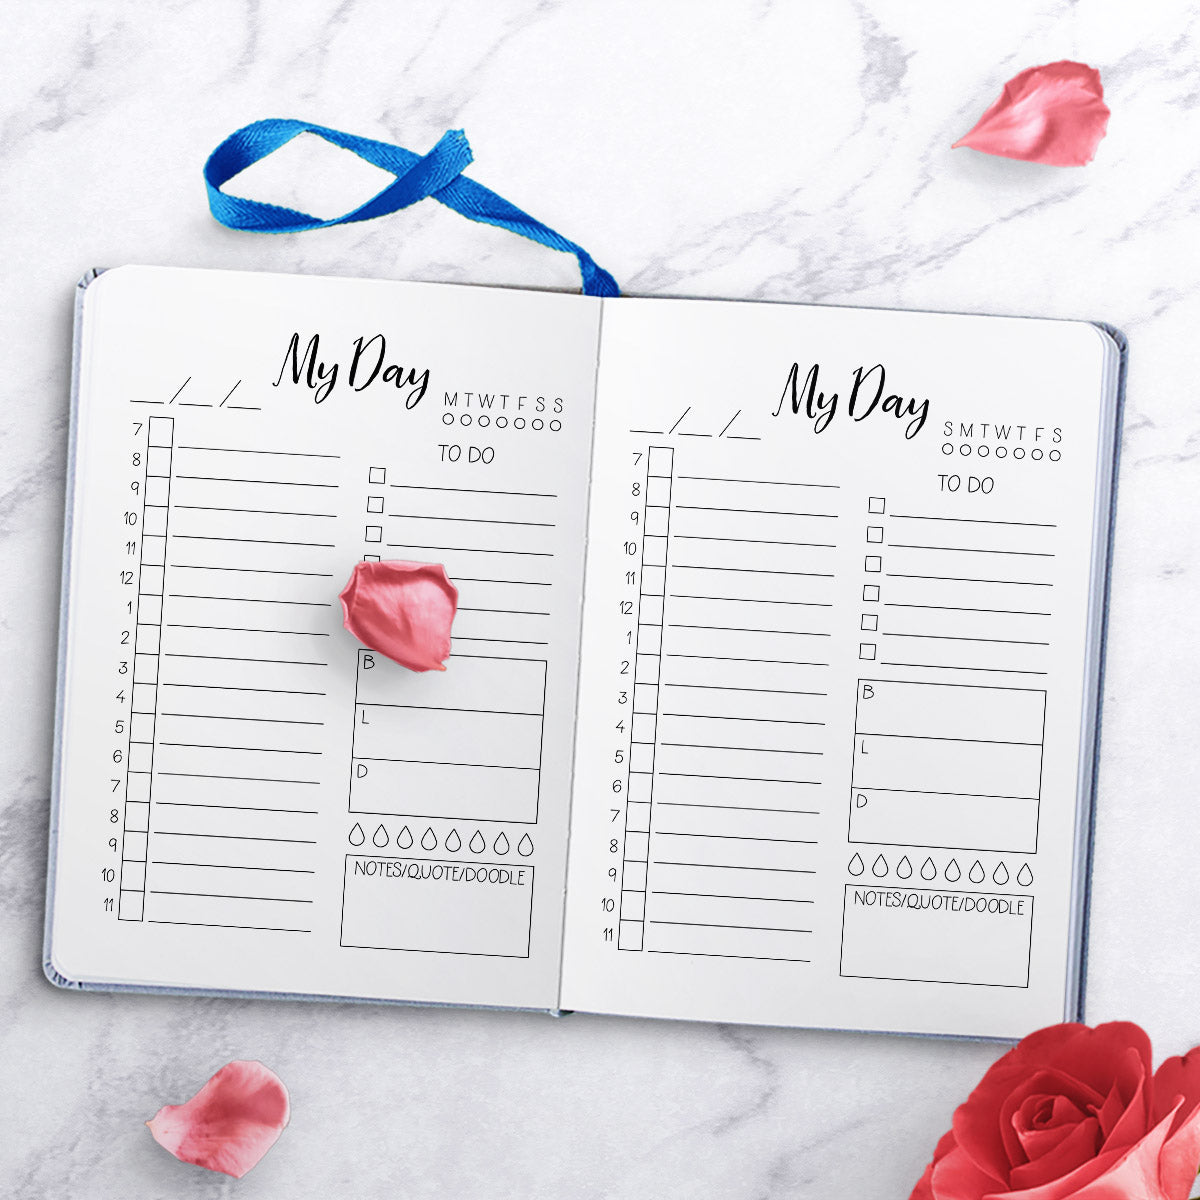 Bullet Journal Free Printable- "My Day" Daily Schedule